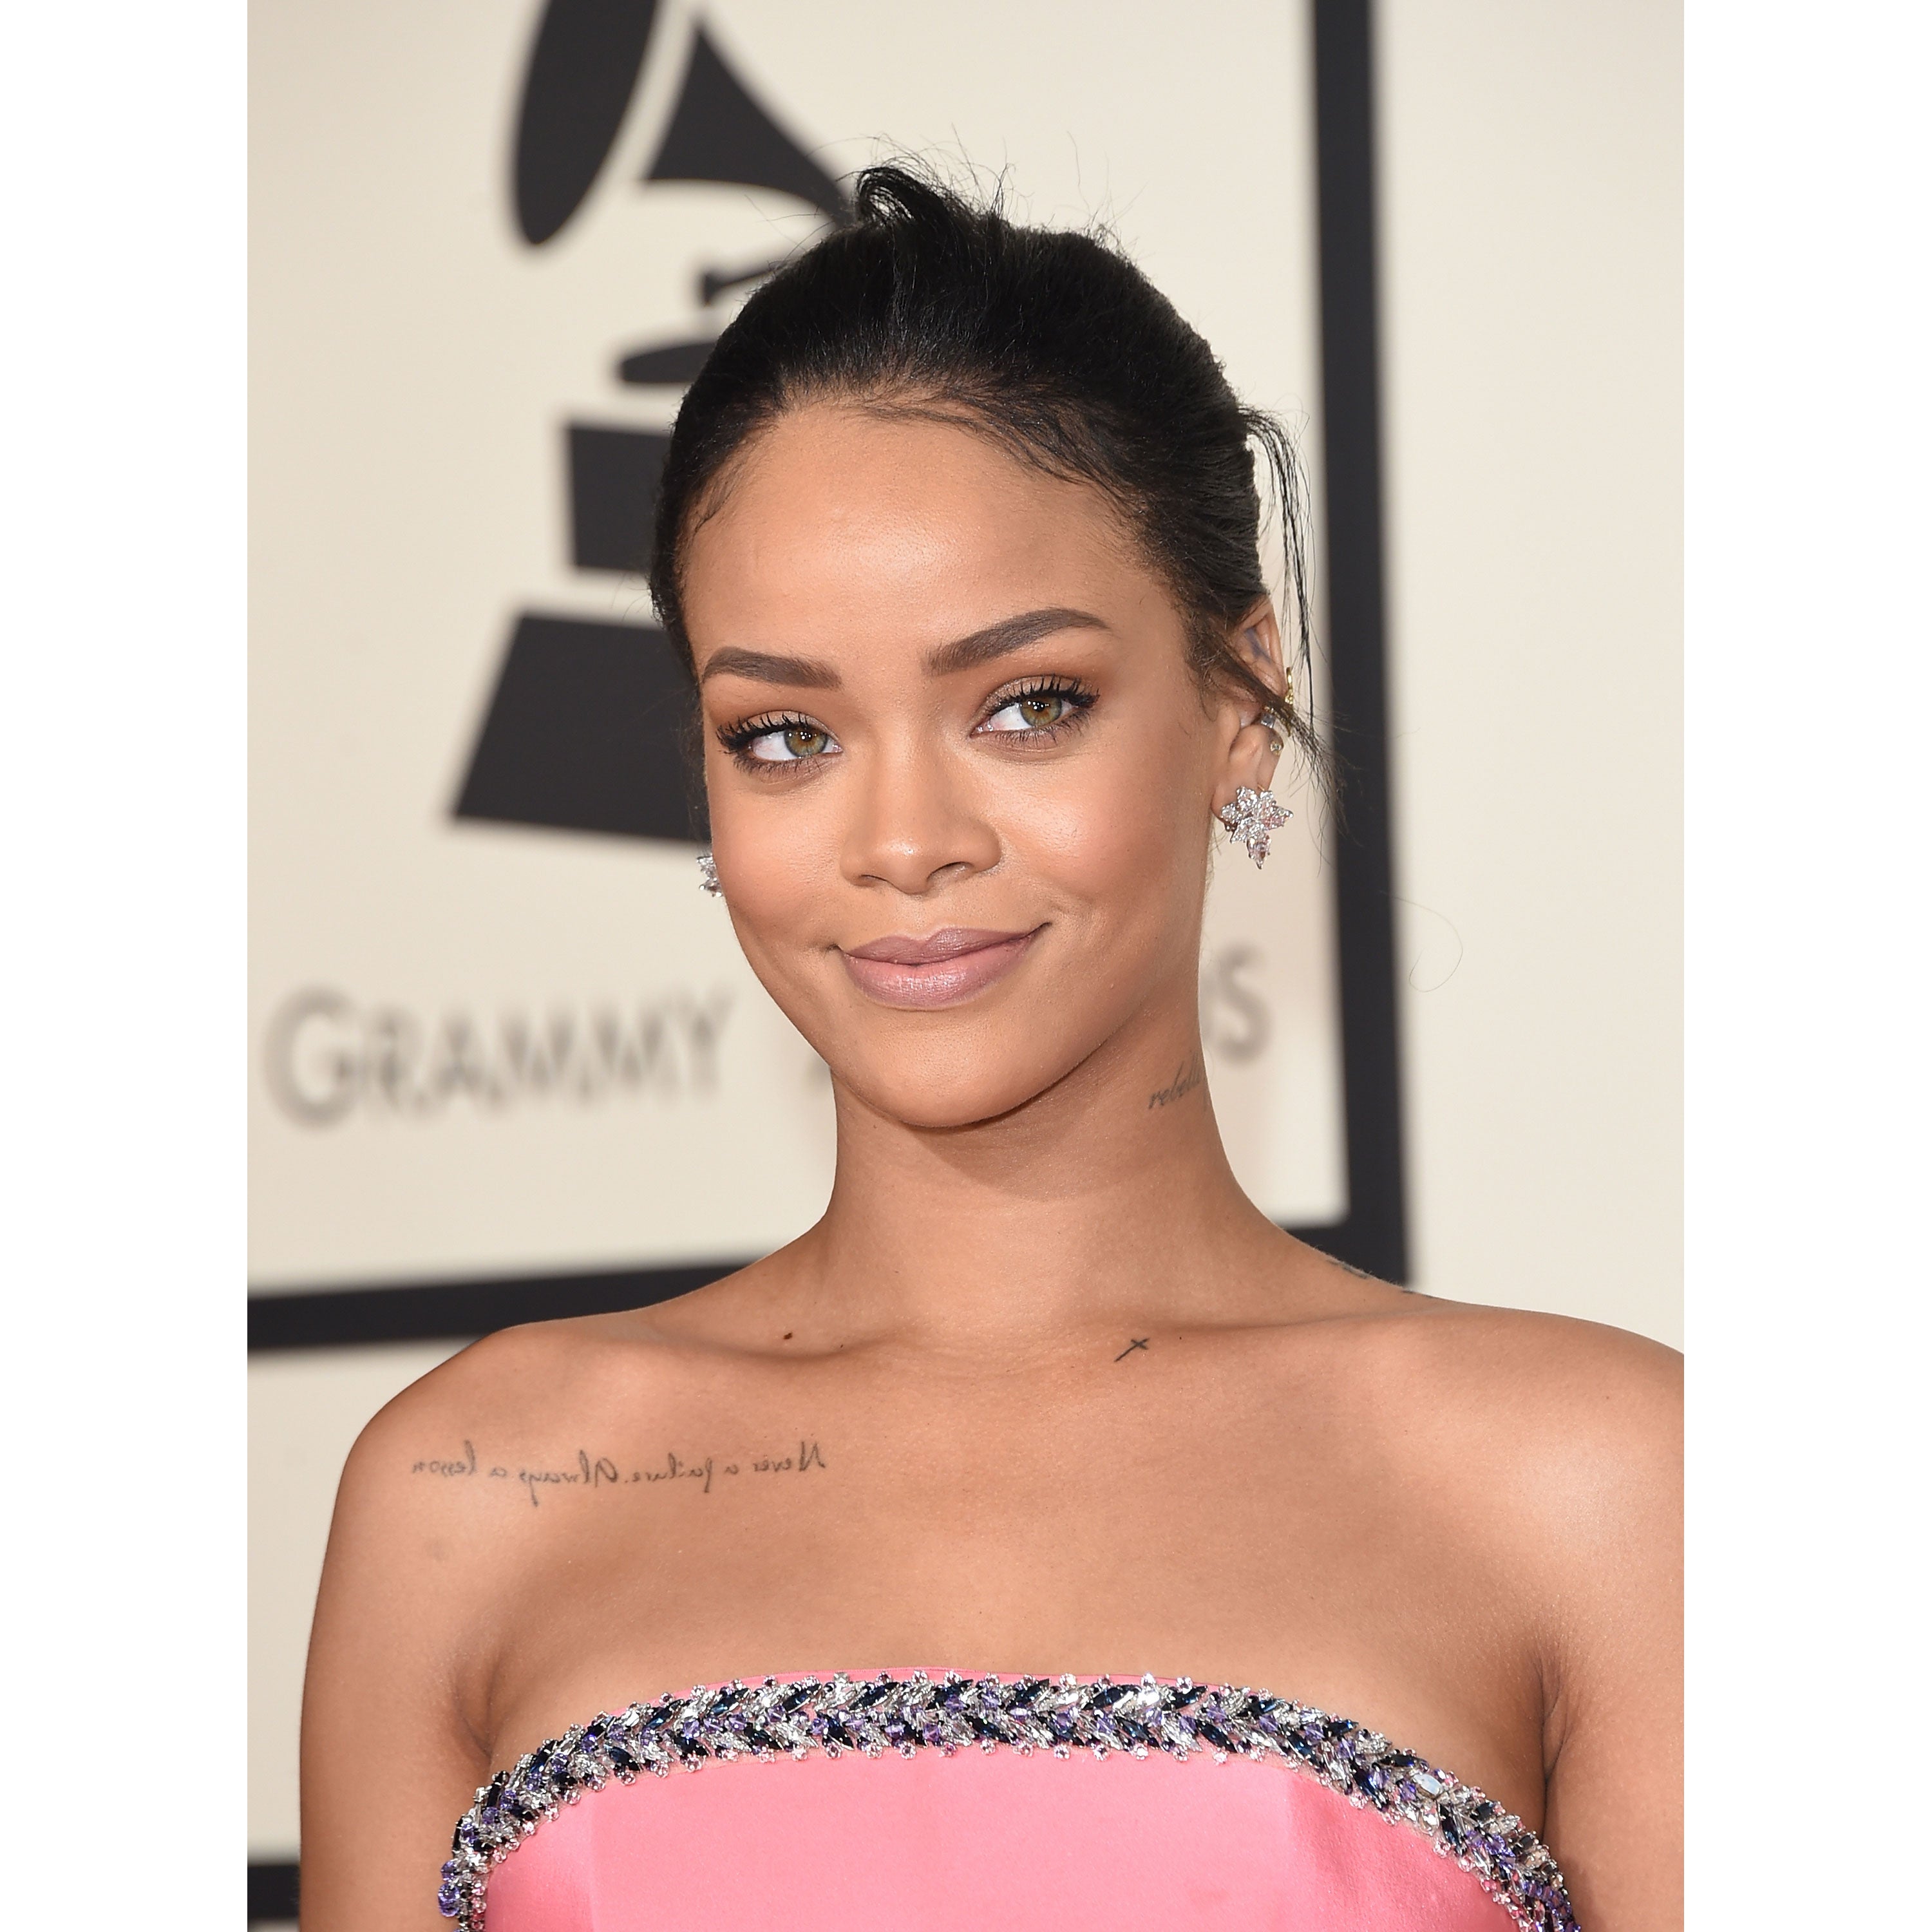 15 Beauty Items We Want To See From Rihanna’s Makeup Line
